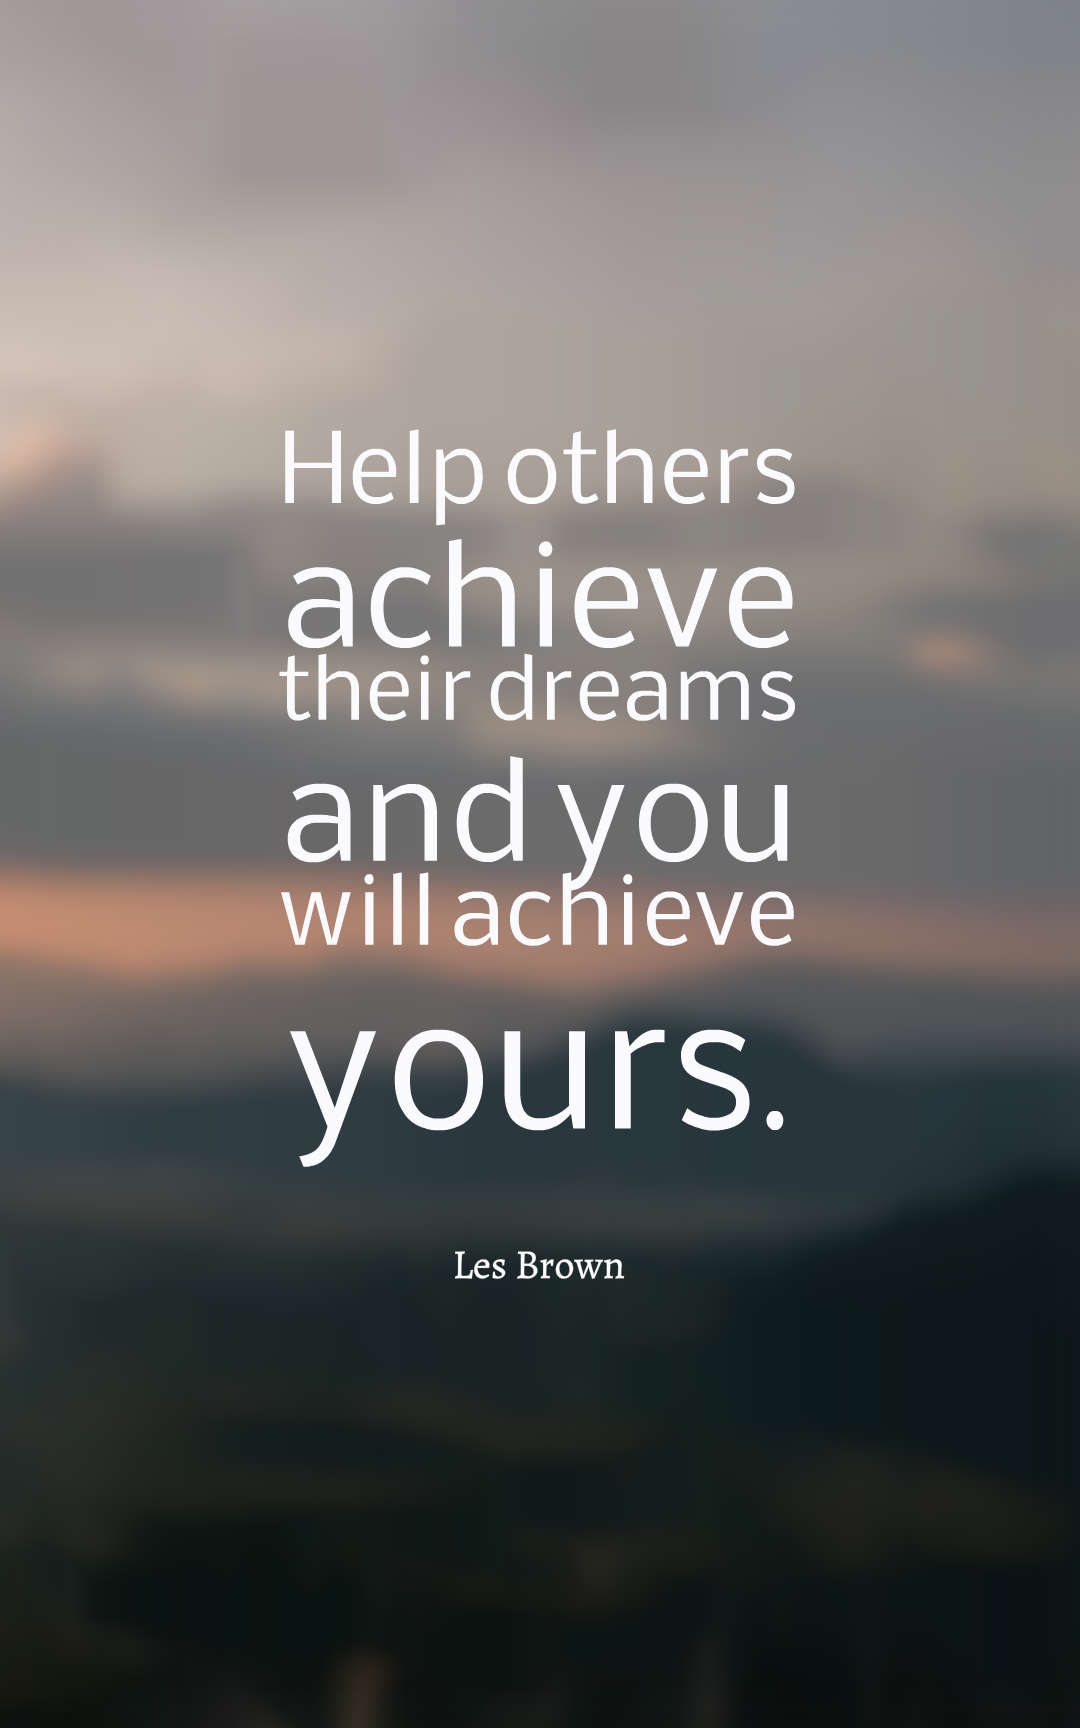 Help others achieve their dreams and you will achieve yours.